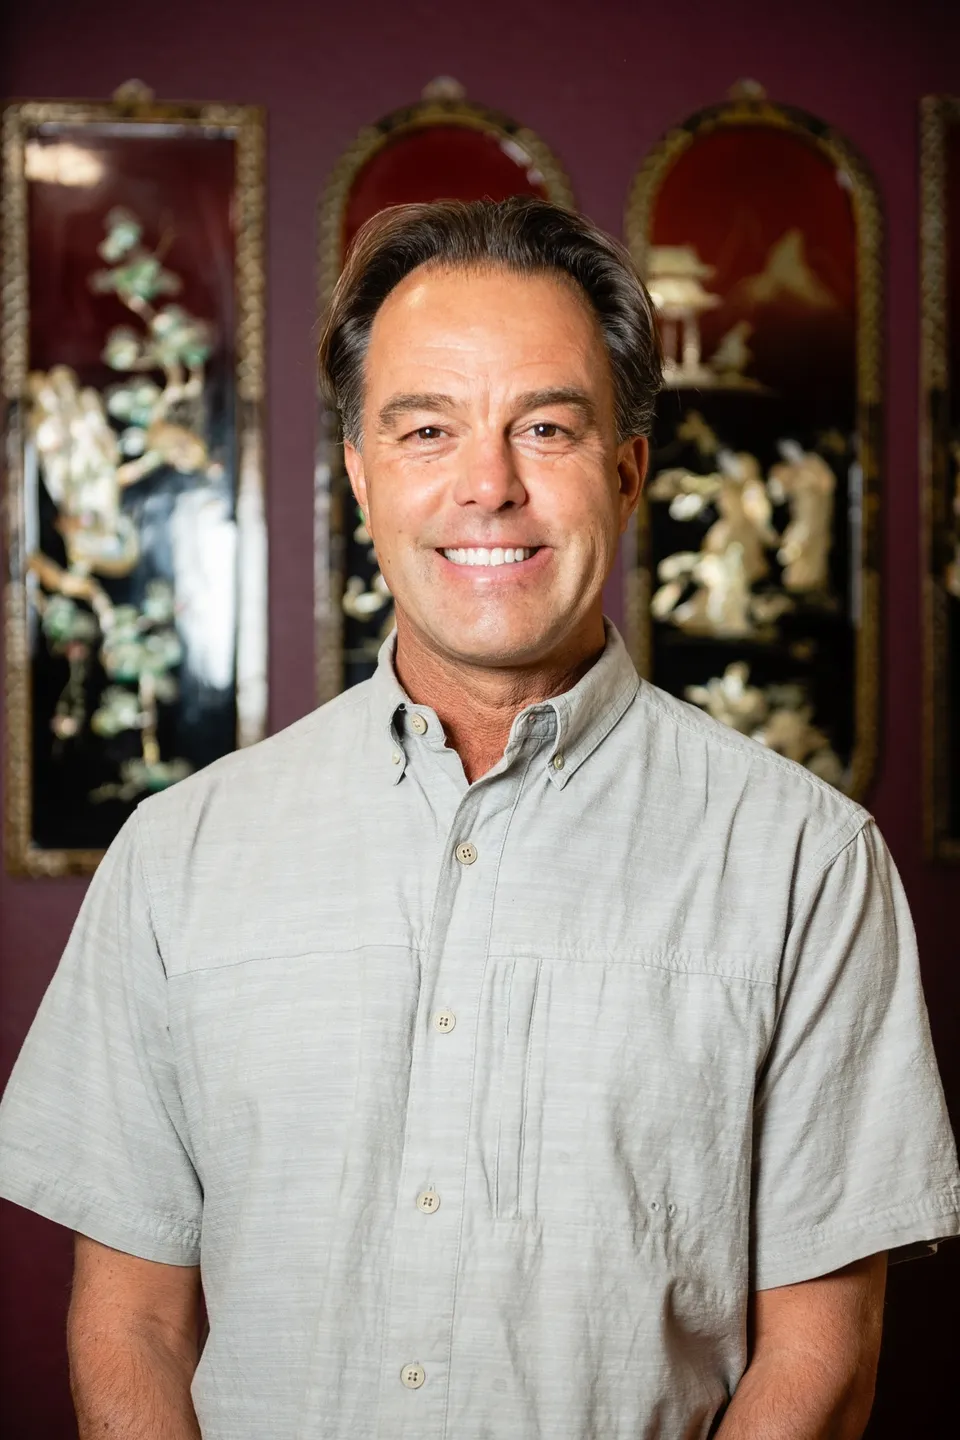 A man in grey shirt smiling for the camera.